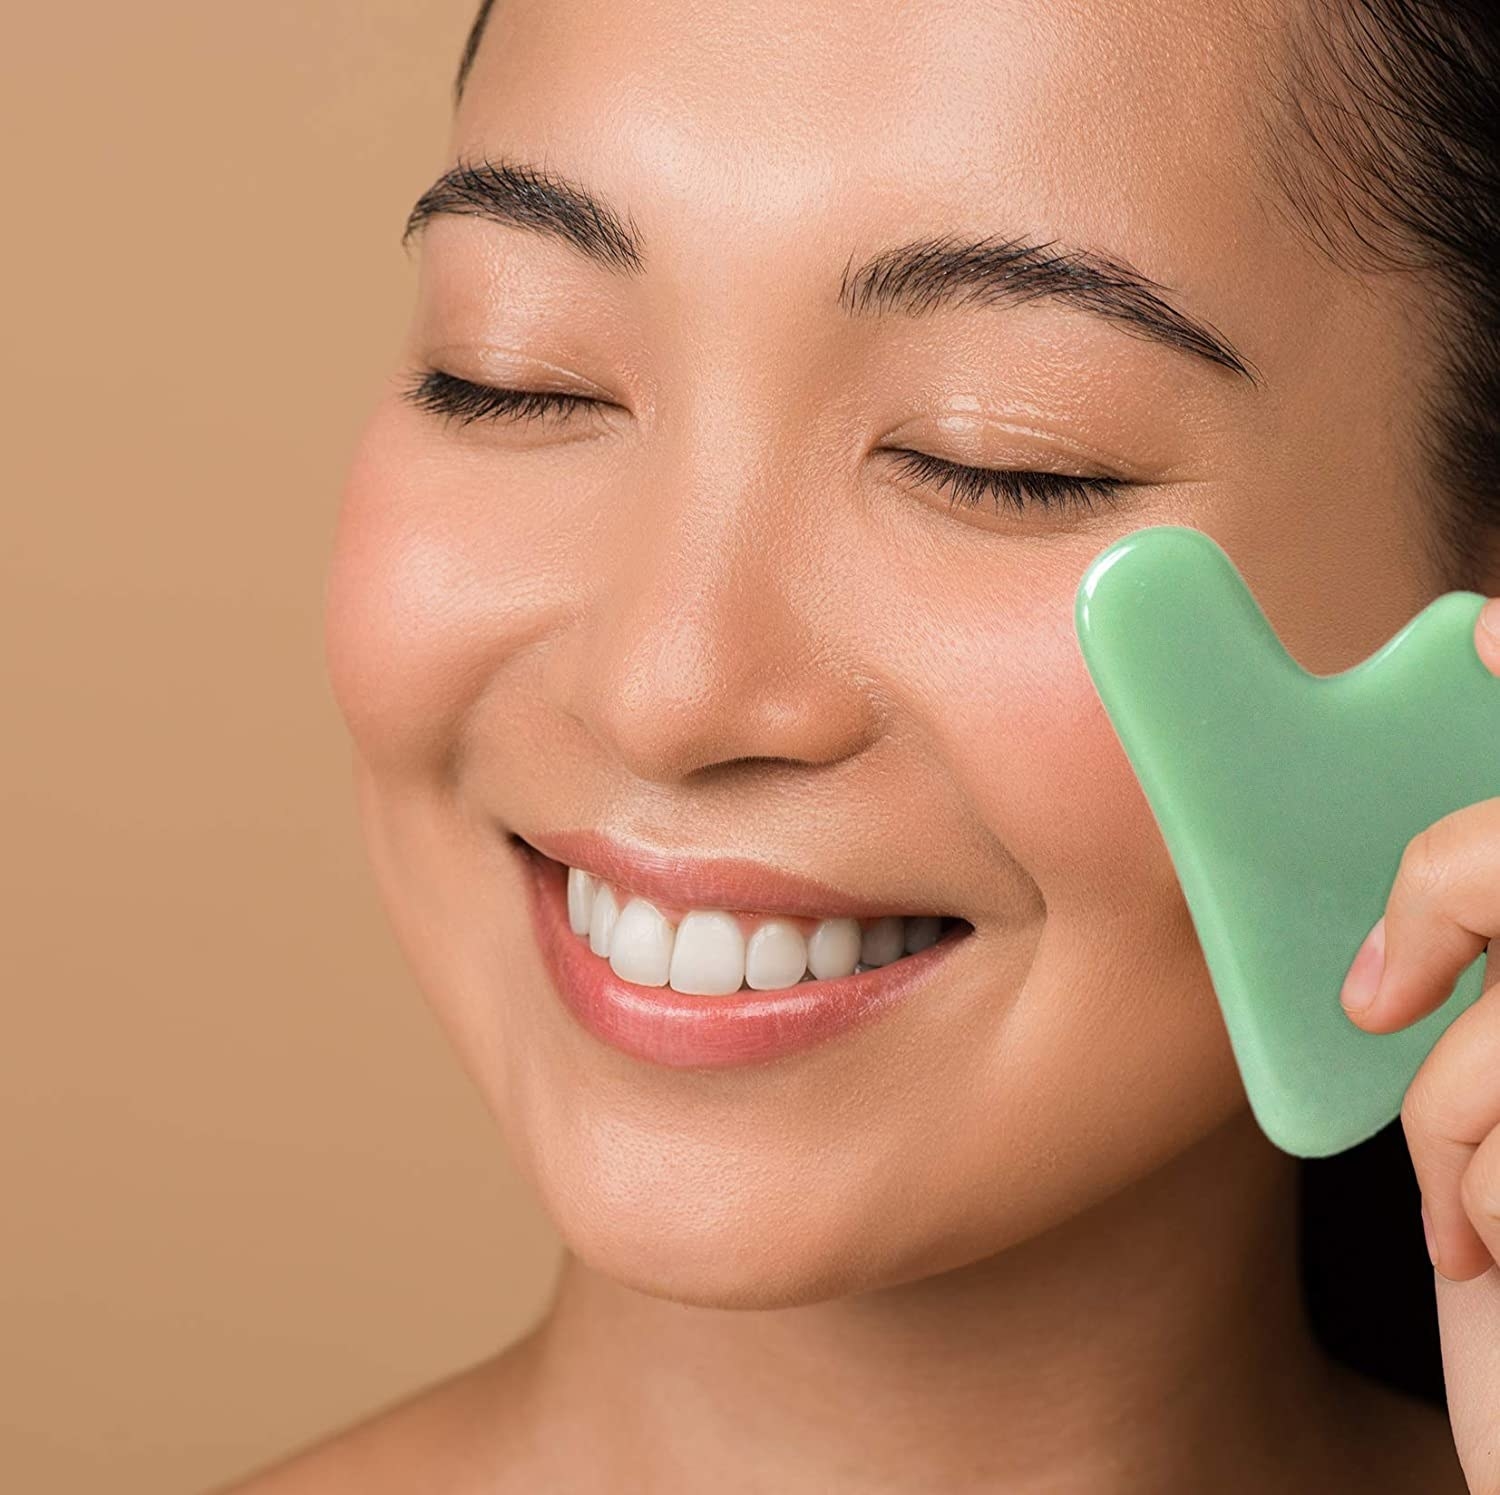 A person using a Gua Sha tool on their face